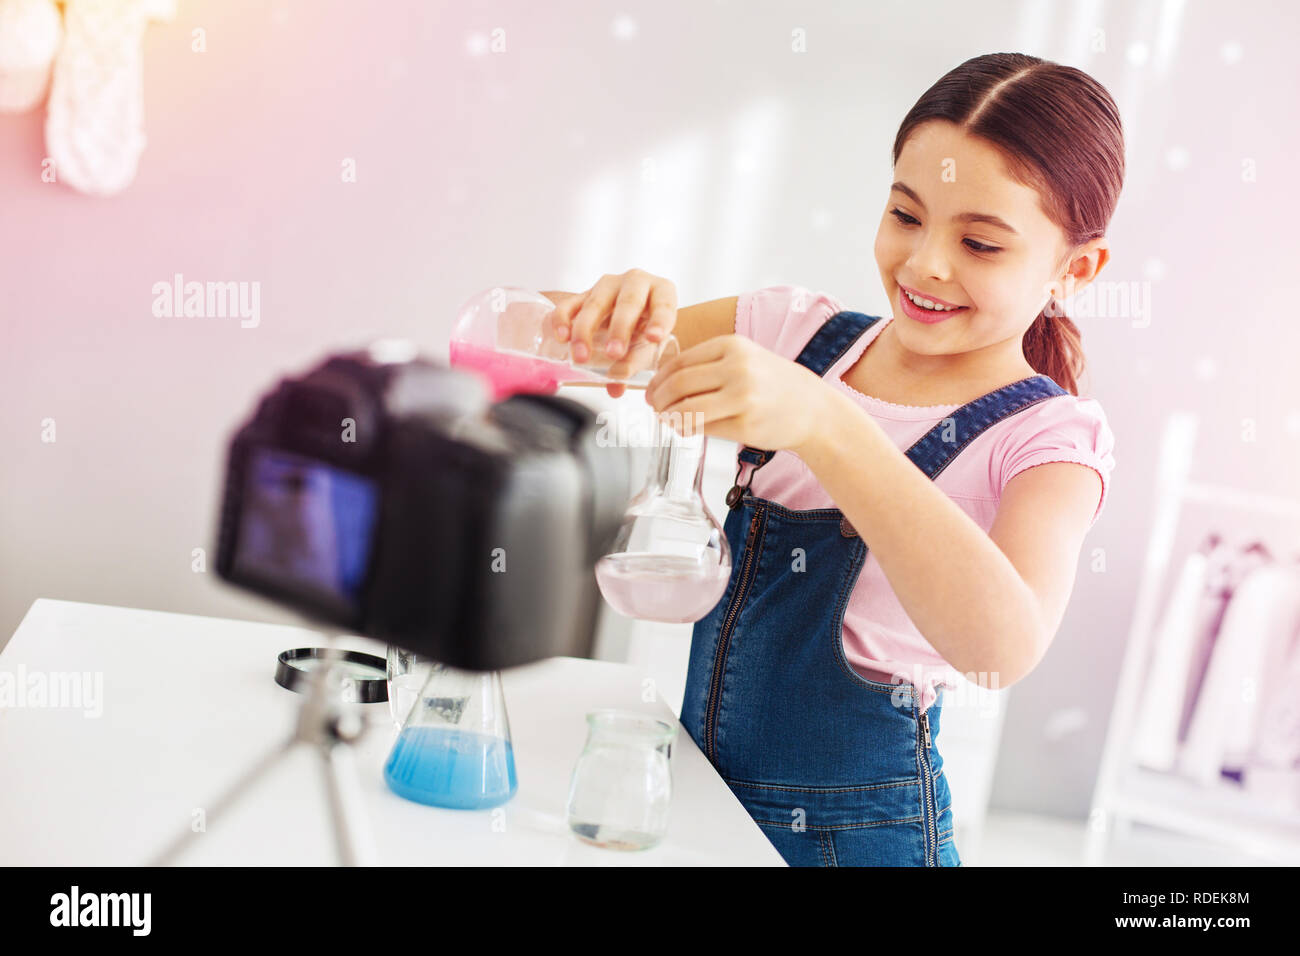 Dark-haired girl wearing jumpsuit feeling excited making chemistry experiment Stock Photo